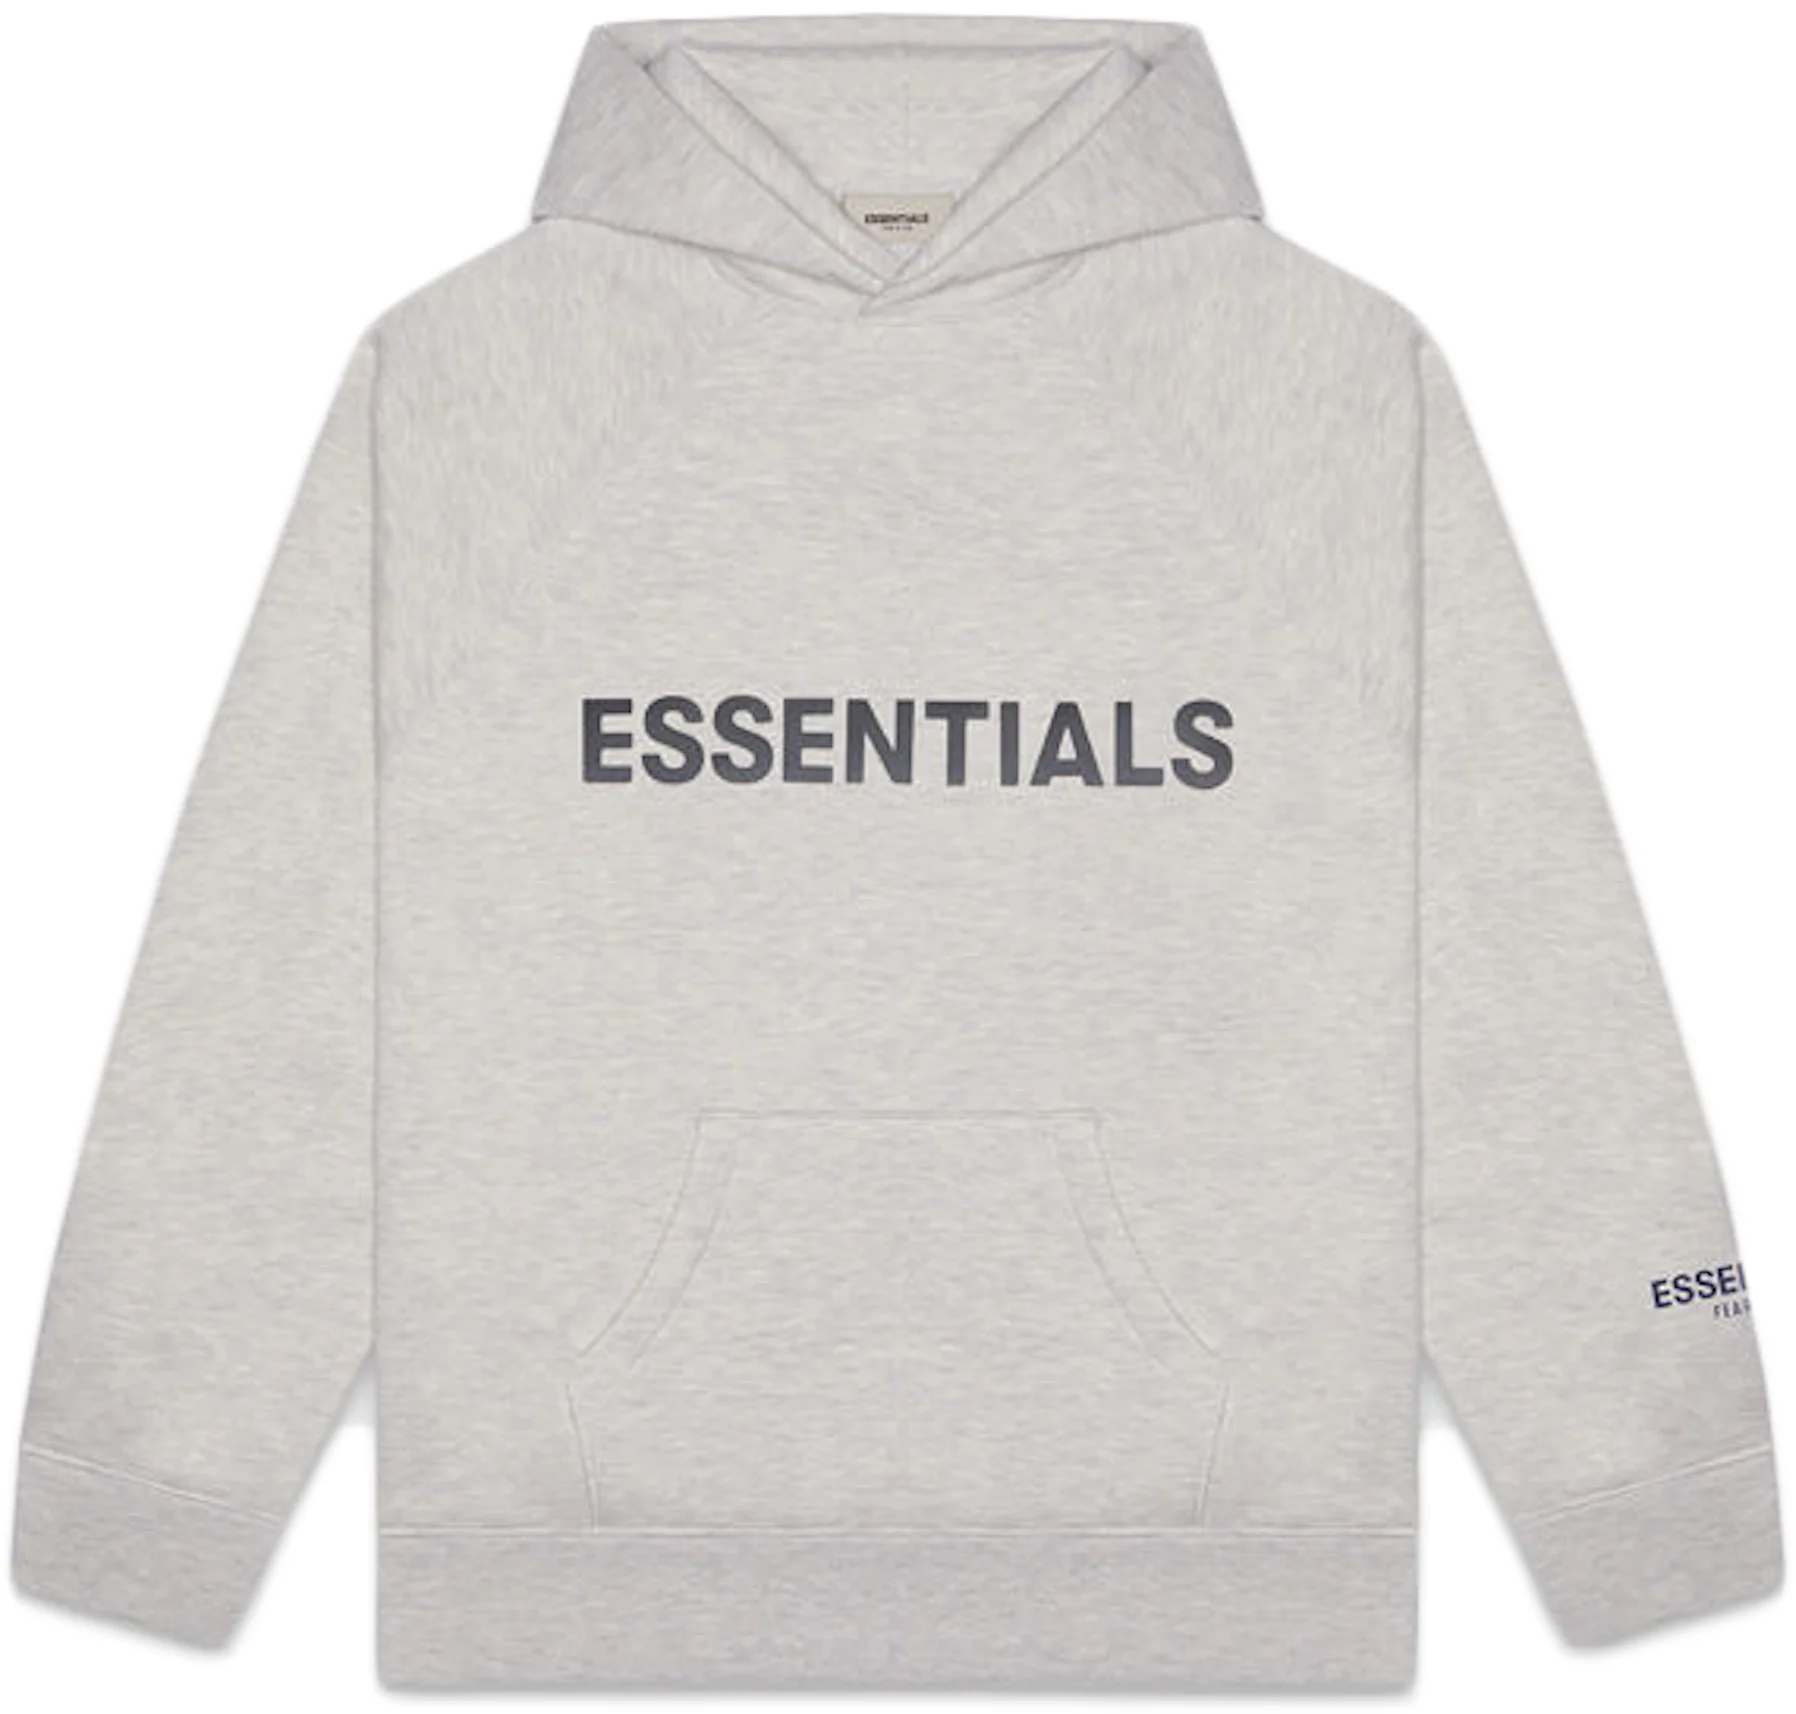 https://images.stockx.com/images/FEAR-OF-GOD-ESSENTIALS-3D-Silicon-Applique-Pullover-Hoodie-Heather-Oatmeal.jpg?fit=fill&bg=FFFFFF&w=1200&h=857&fm=webp&auto=compress&dpr=2&trim=color&updated_at=1610679793&q=60